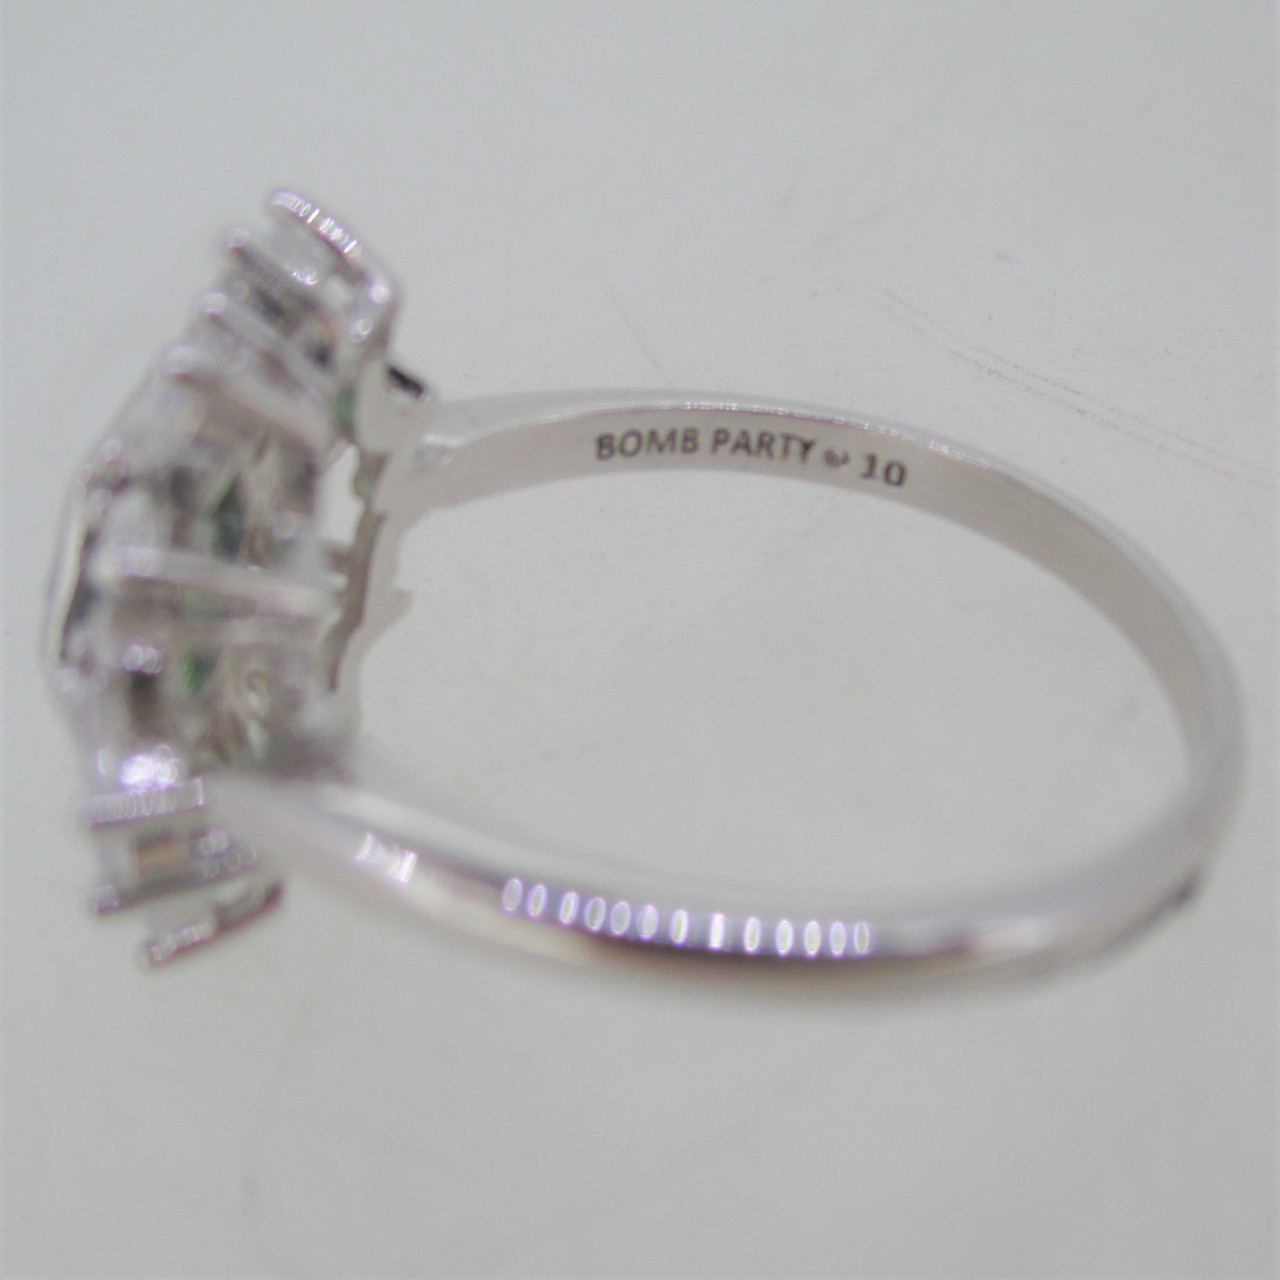 Bomb Party Rhodium Plated Green Ring Size 10 RBP3021